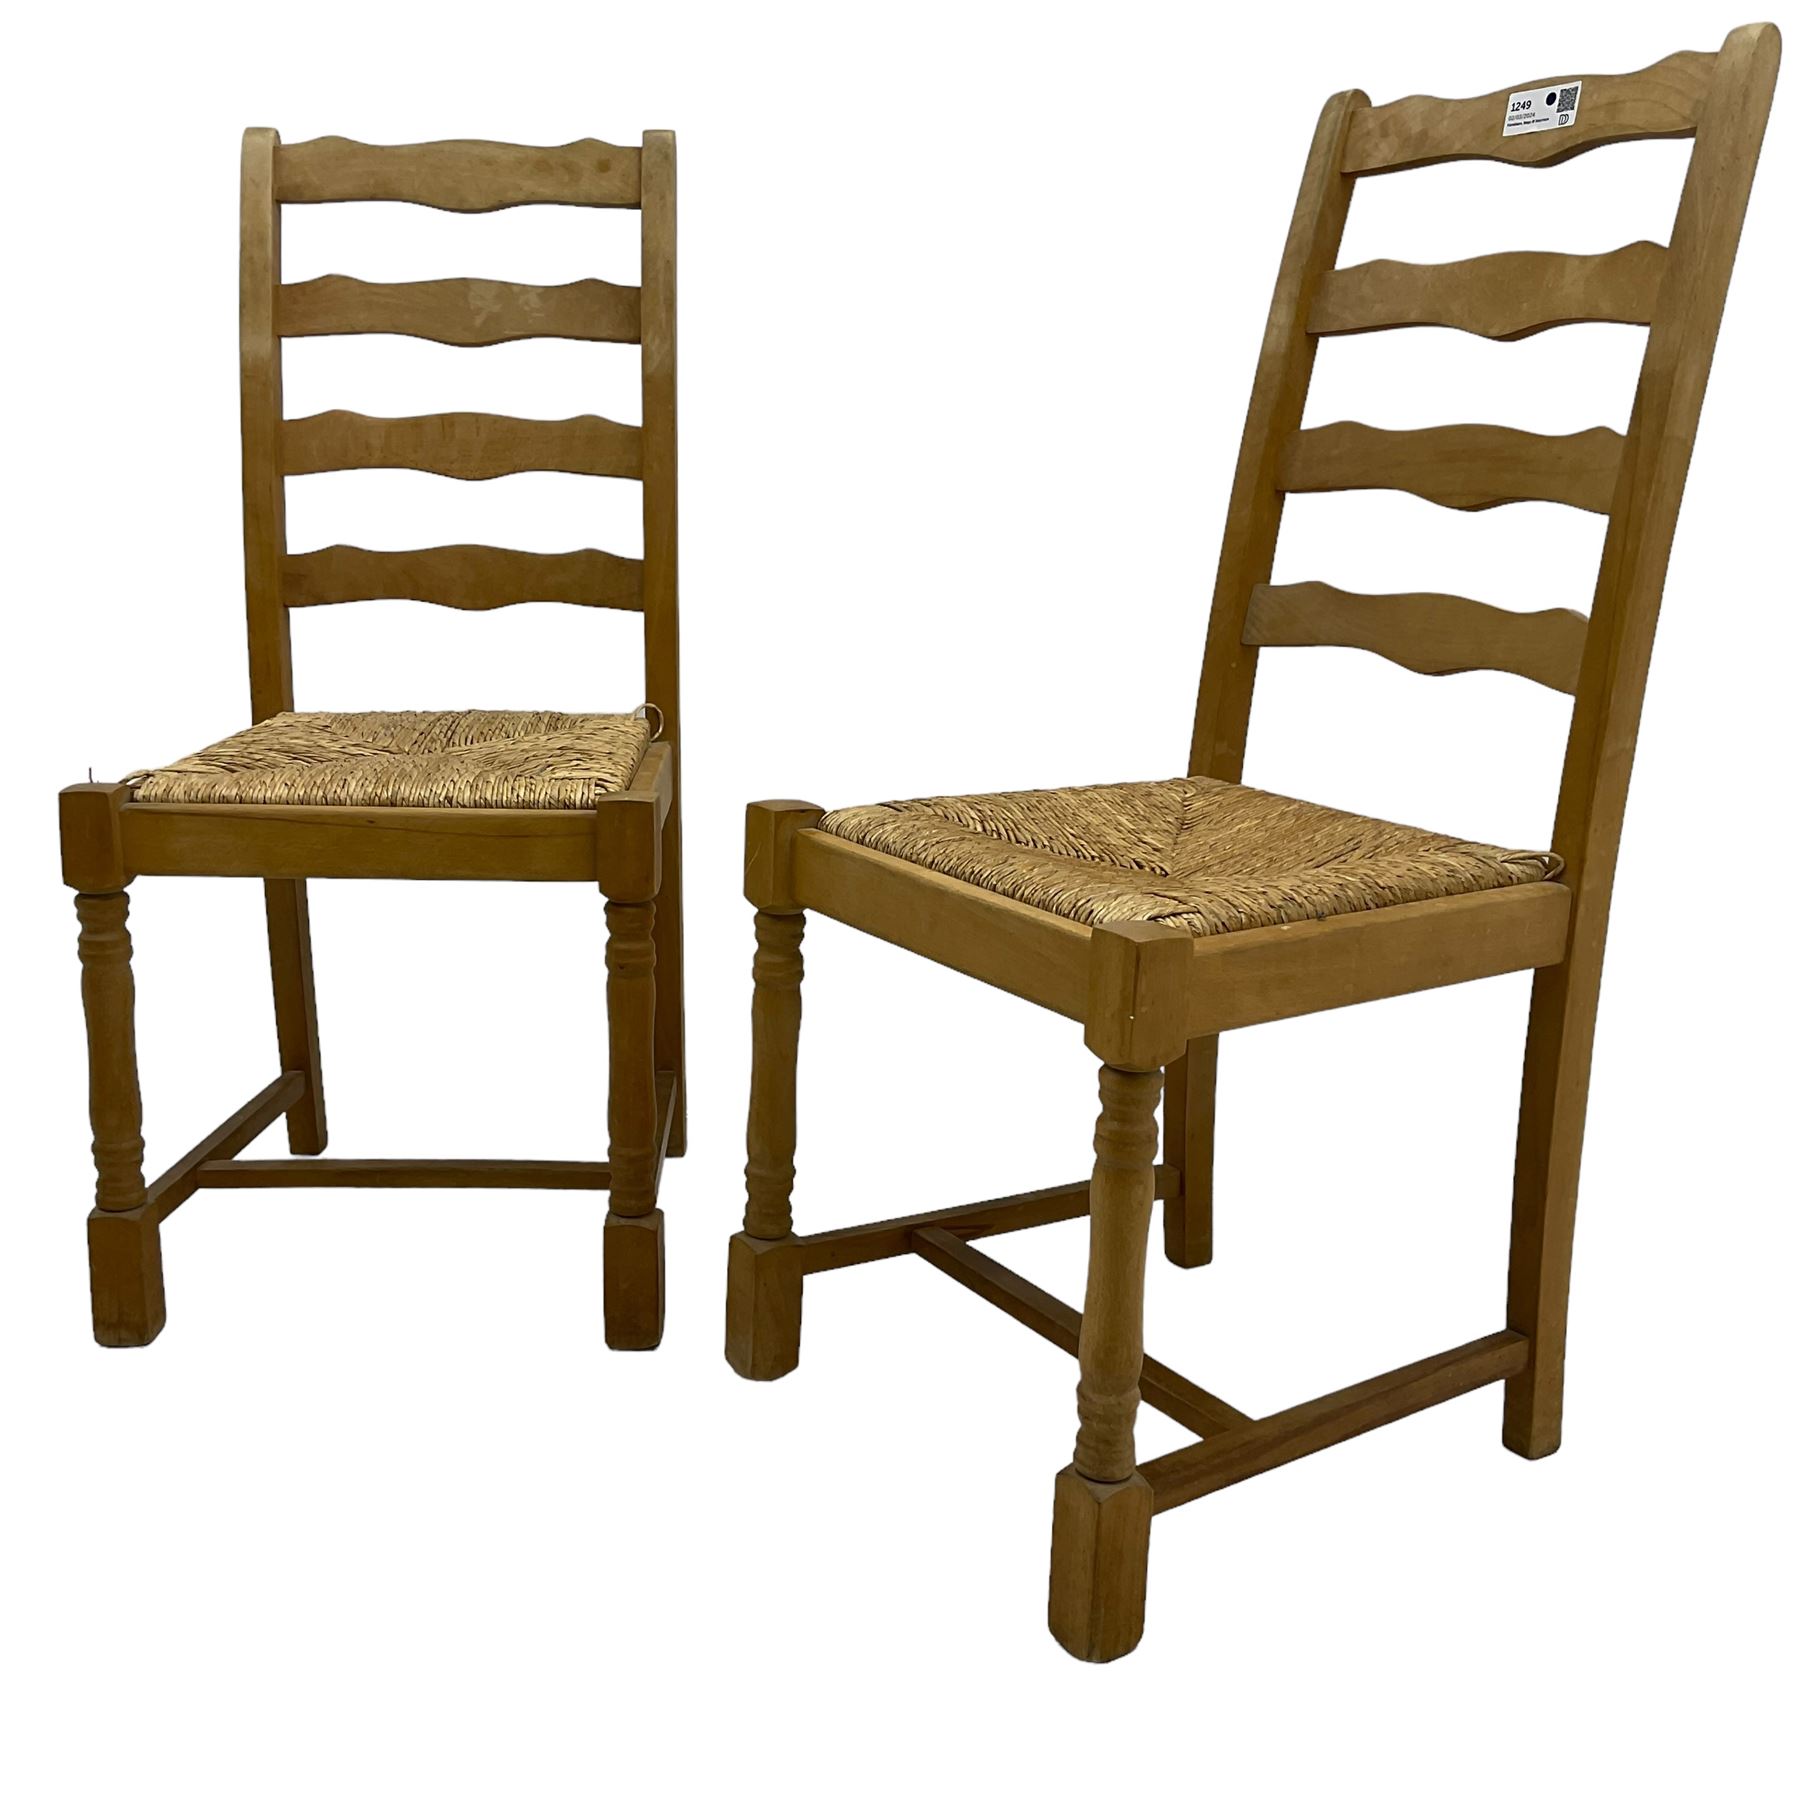 Set of six (4+2) beech dining chairs - Image 2 of 8